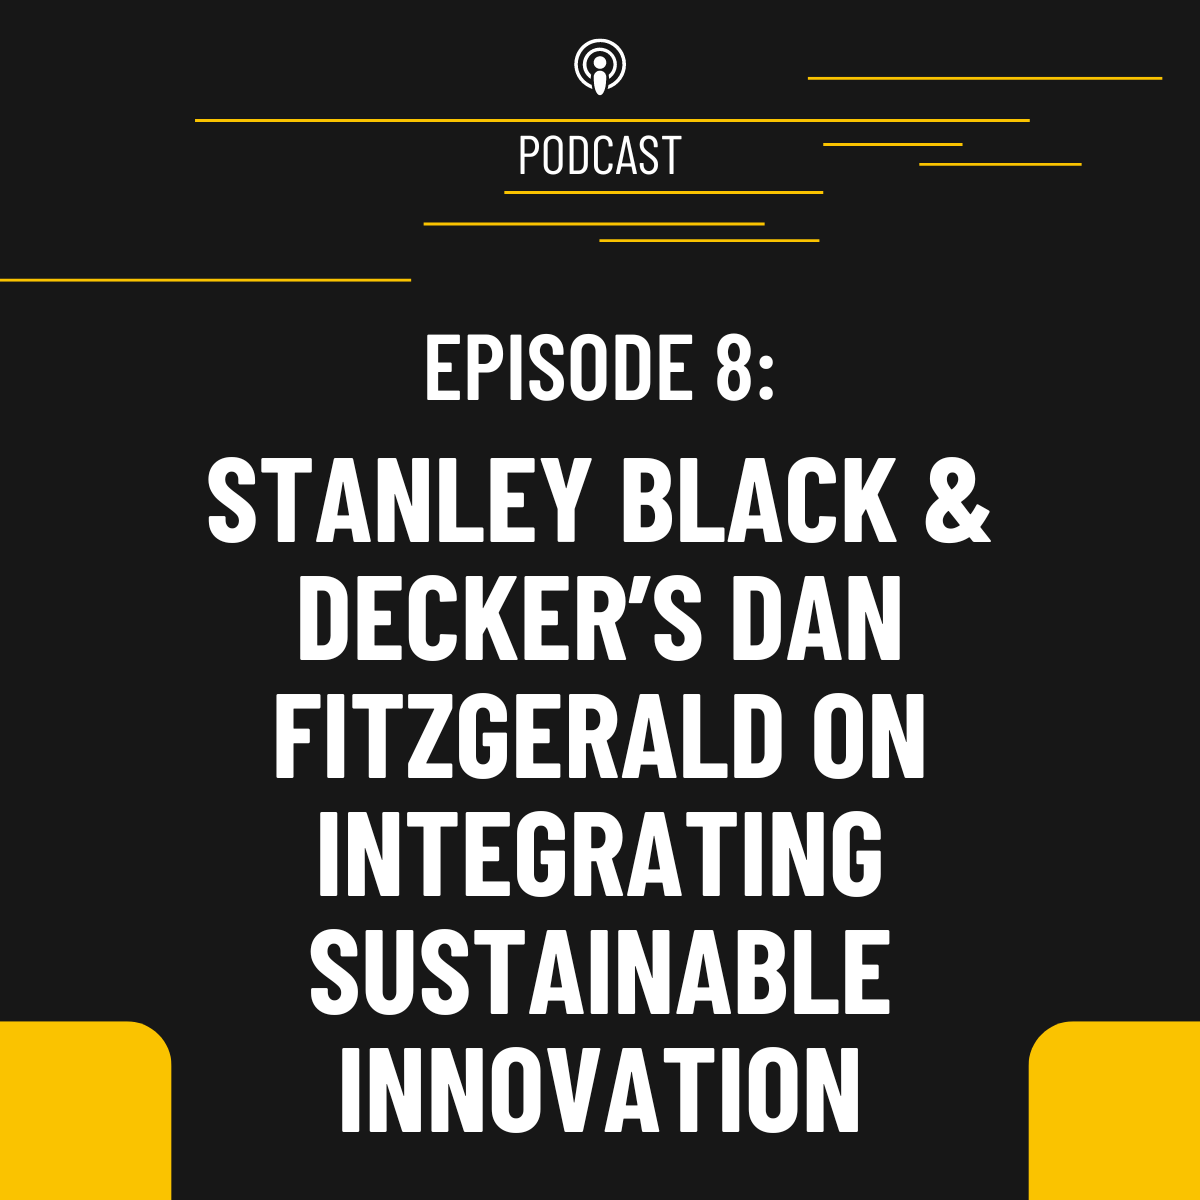 Episode 8: Stanley Black & Decker's Dan Fitzgerald on customers and de-risking and integrating sustainable innovation